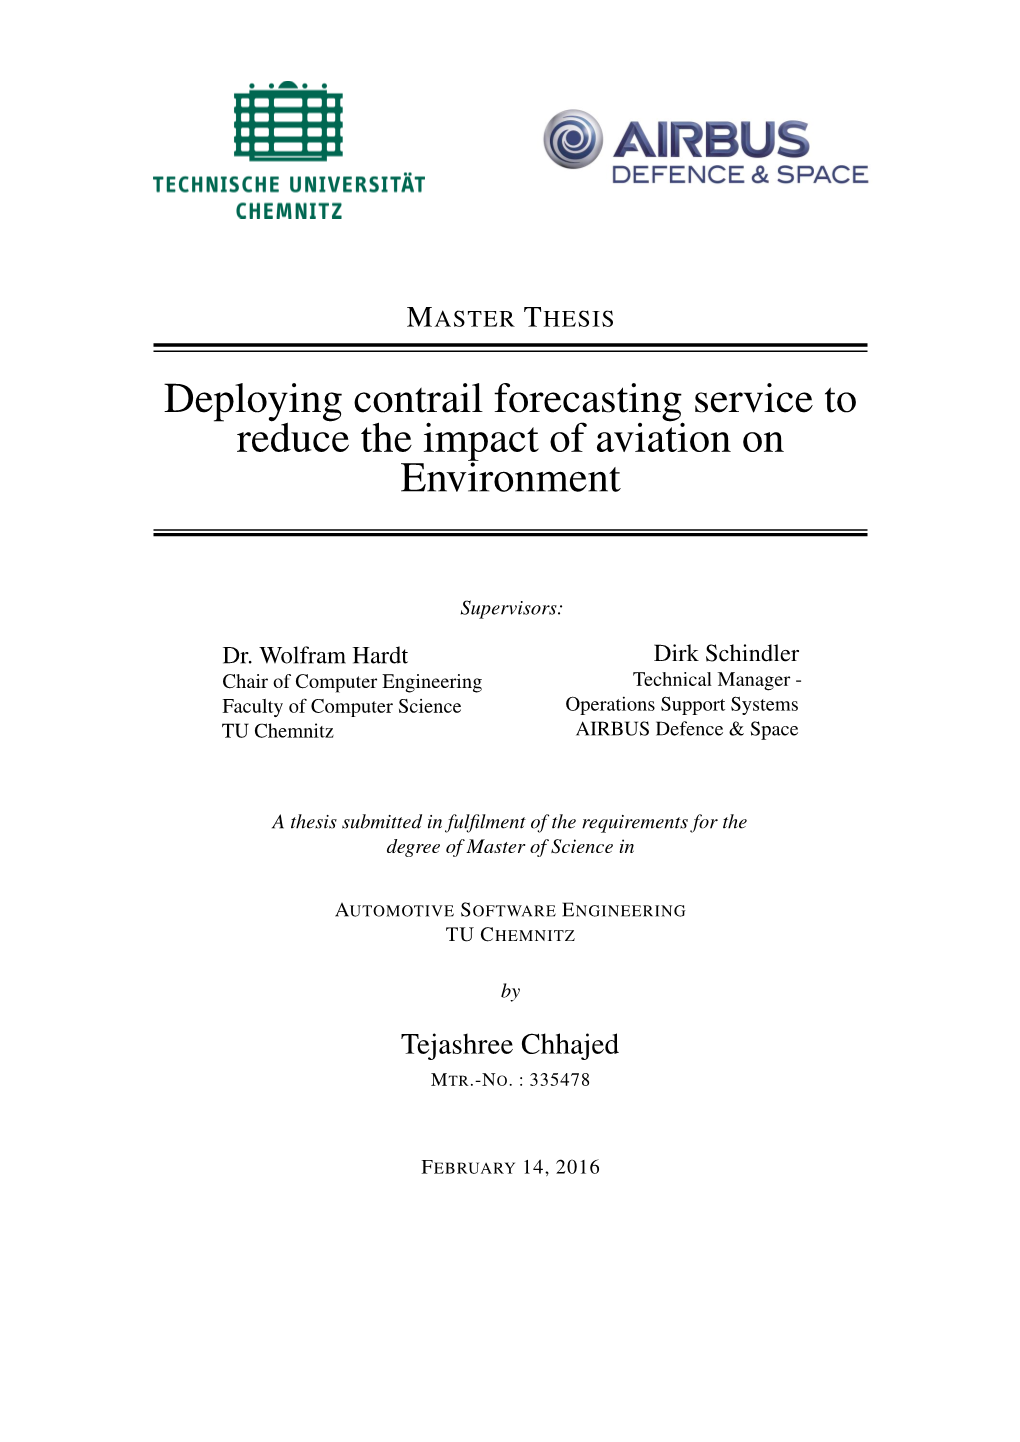 Deploying Contrail Forecasting Service to Reduce the Impact of Aviation on Environment